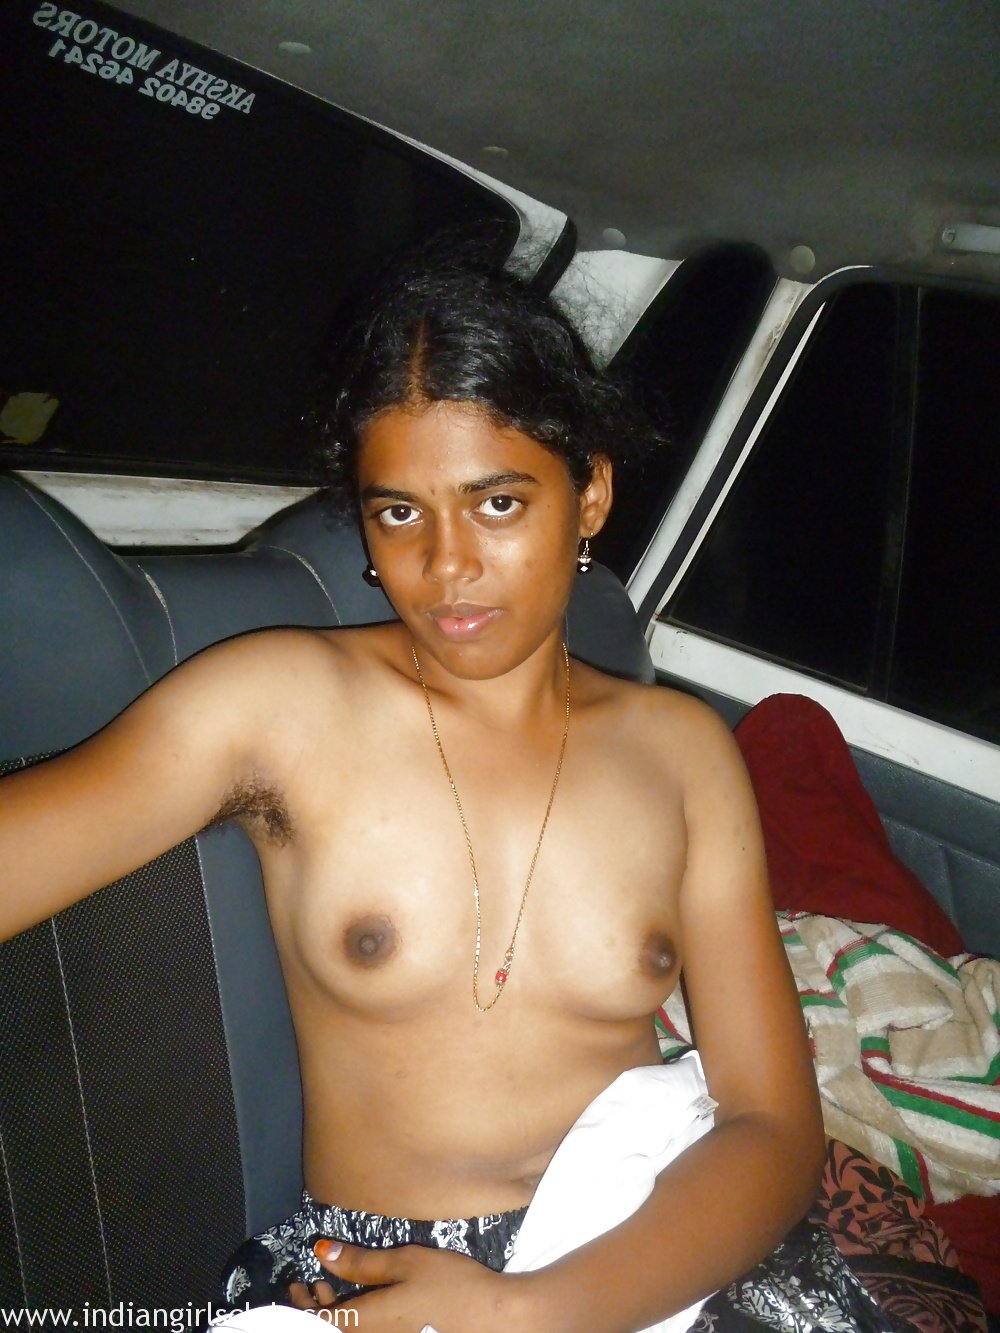 Indian Wife Nude Gallery - Erotic South Indian Wife Nude Photos - Indian Girls Club